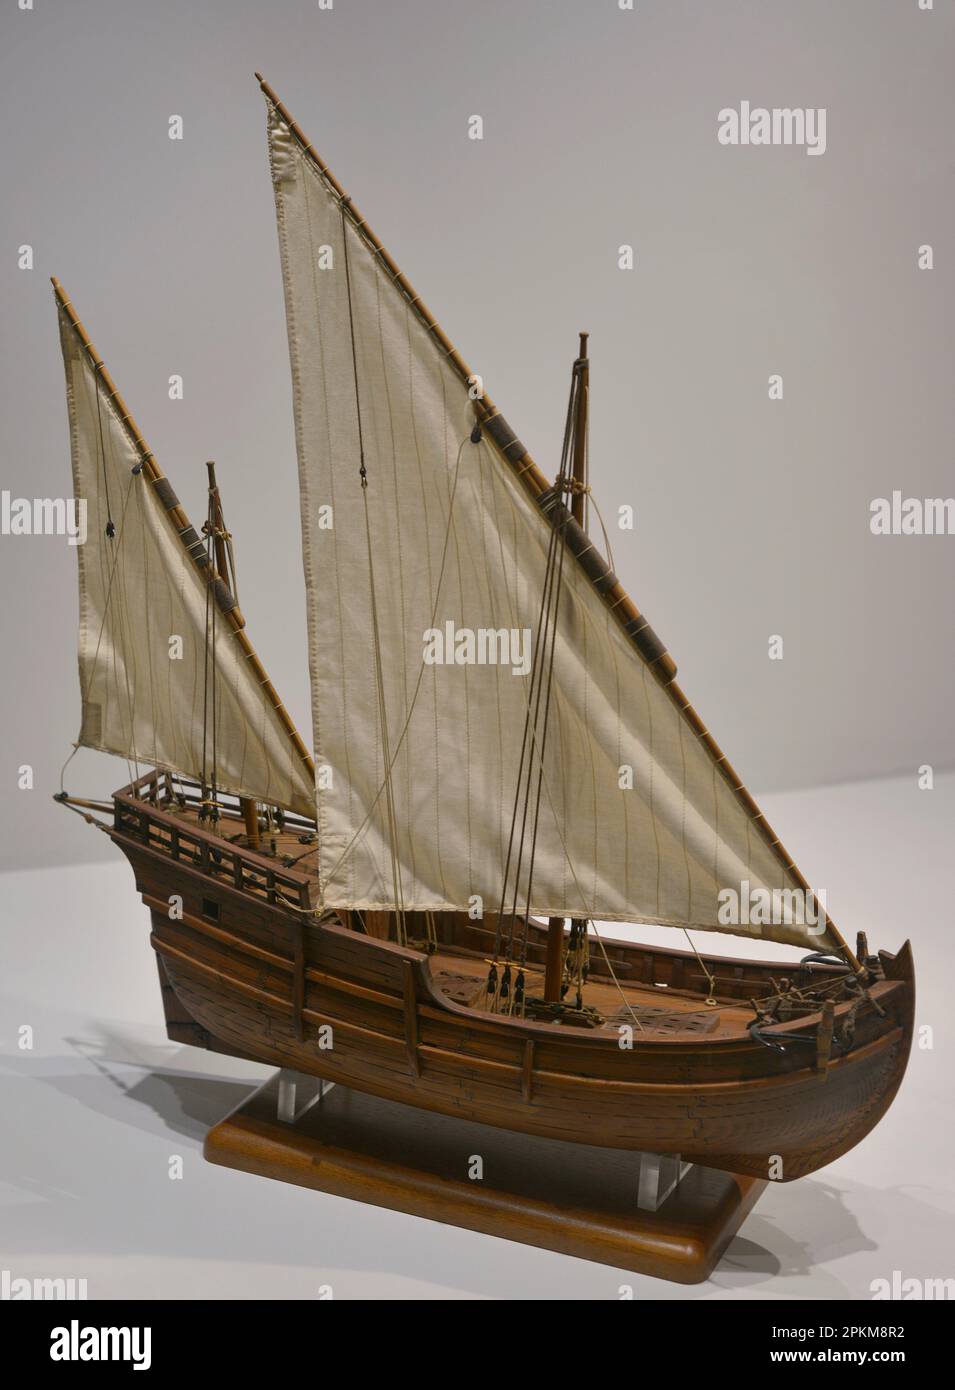 Two-masted lateen rigged caravel. It was the most common type of ship used in maritime exploration from 1440 until the end of the 15th century. Model. Maritime Museum. Lisbon, Portugal. Stock Photo